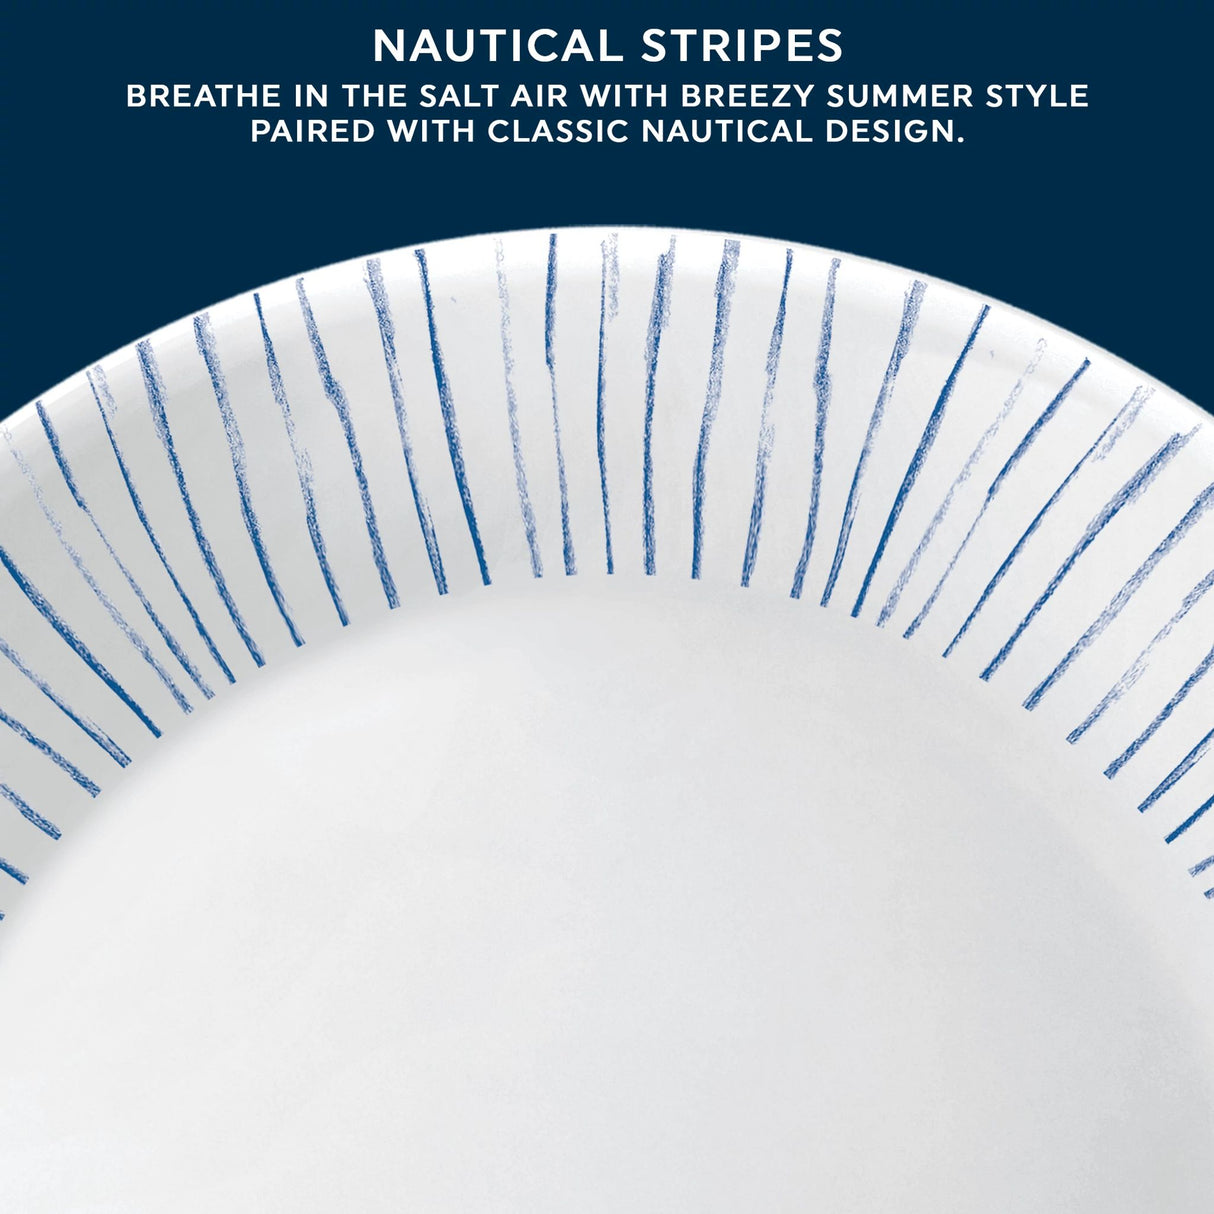  Nautical Stripes Plate with text breath in the salt air with breezy summer style paired with classic nautical design